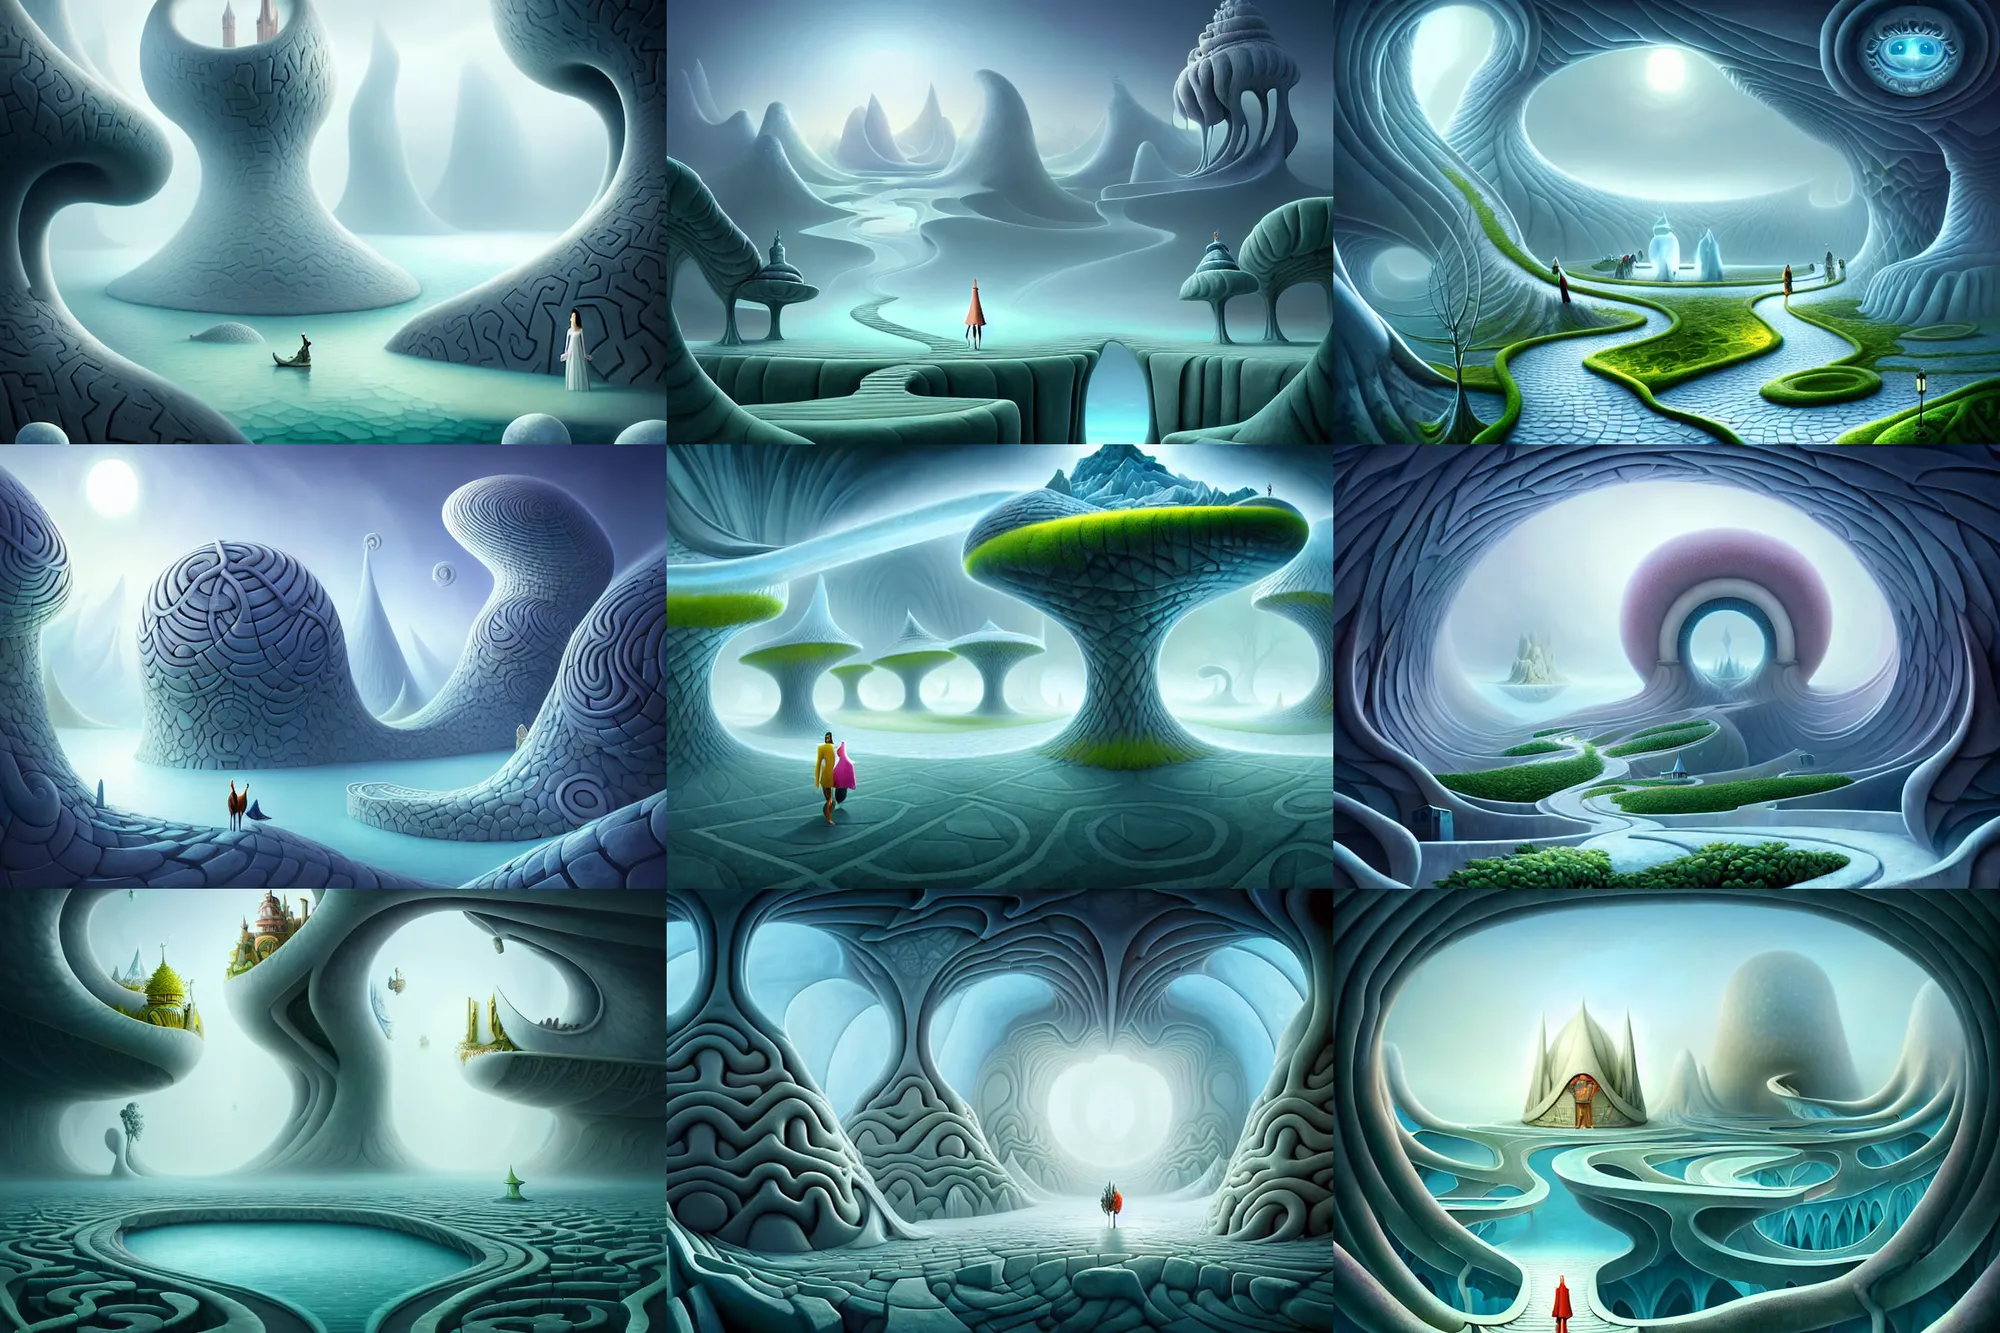 Prompt: a matte painting of an impossible path winding through arctic dream worlds with surreal architecture designed by heironymous bosch, structures inspired by heironymous bosch's garden of earthly delights, surreal ice interiors by cyril rolando and asher durand and natalie shau, insanely detailed, whimsical, intricate, beguiling